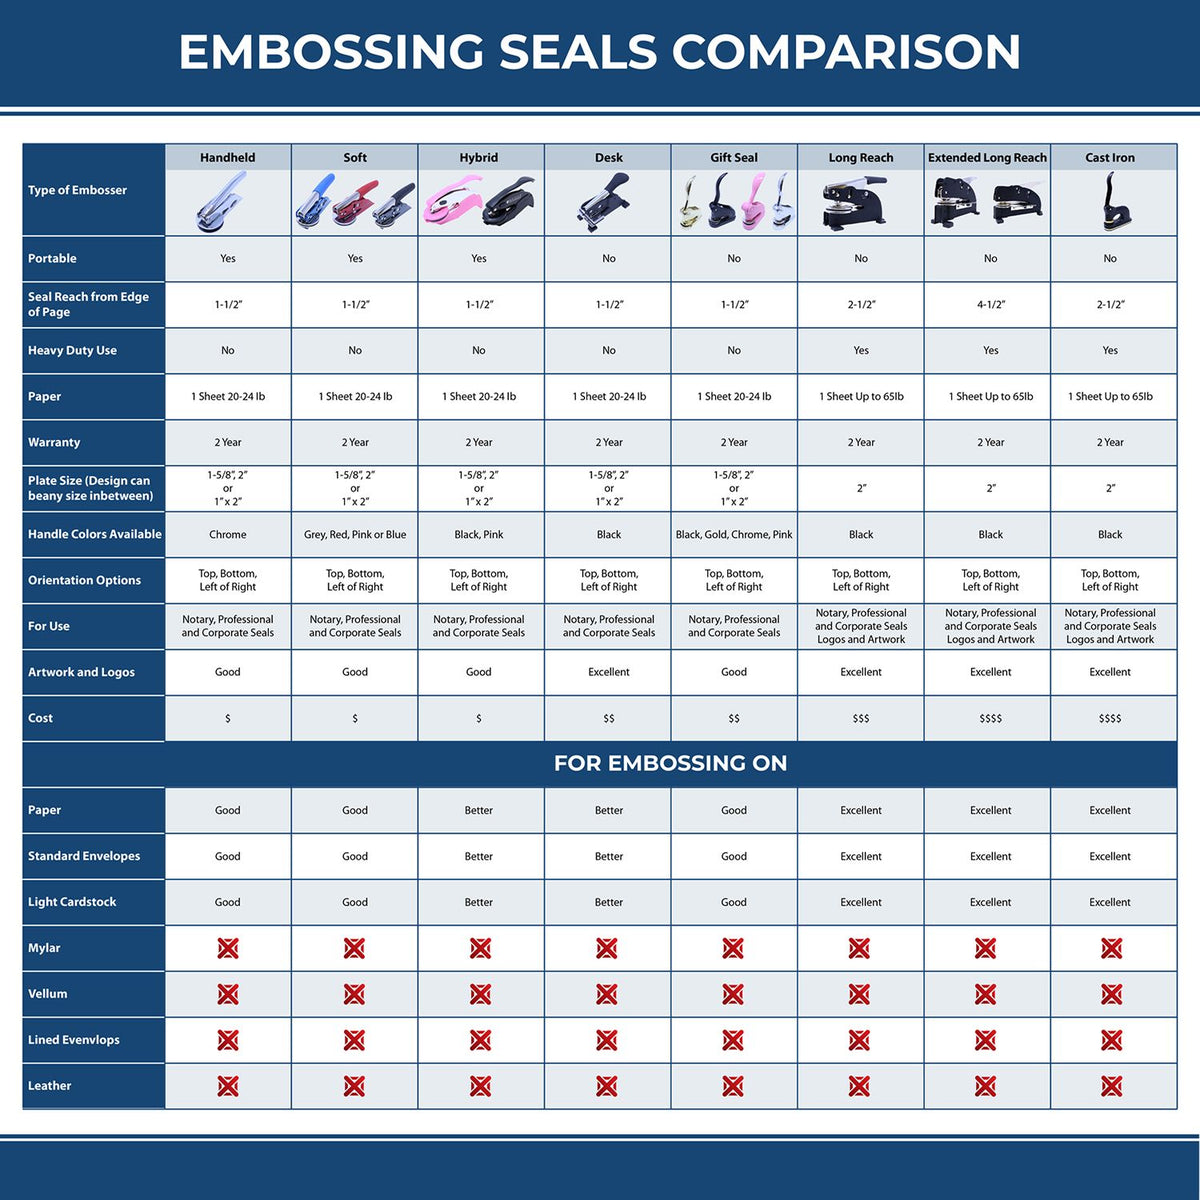 A comparison chart for the different types of mount models available for the Extended Long Reach New Hampshire Architect Seal Embosser.